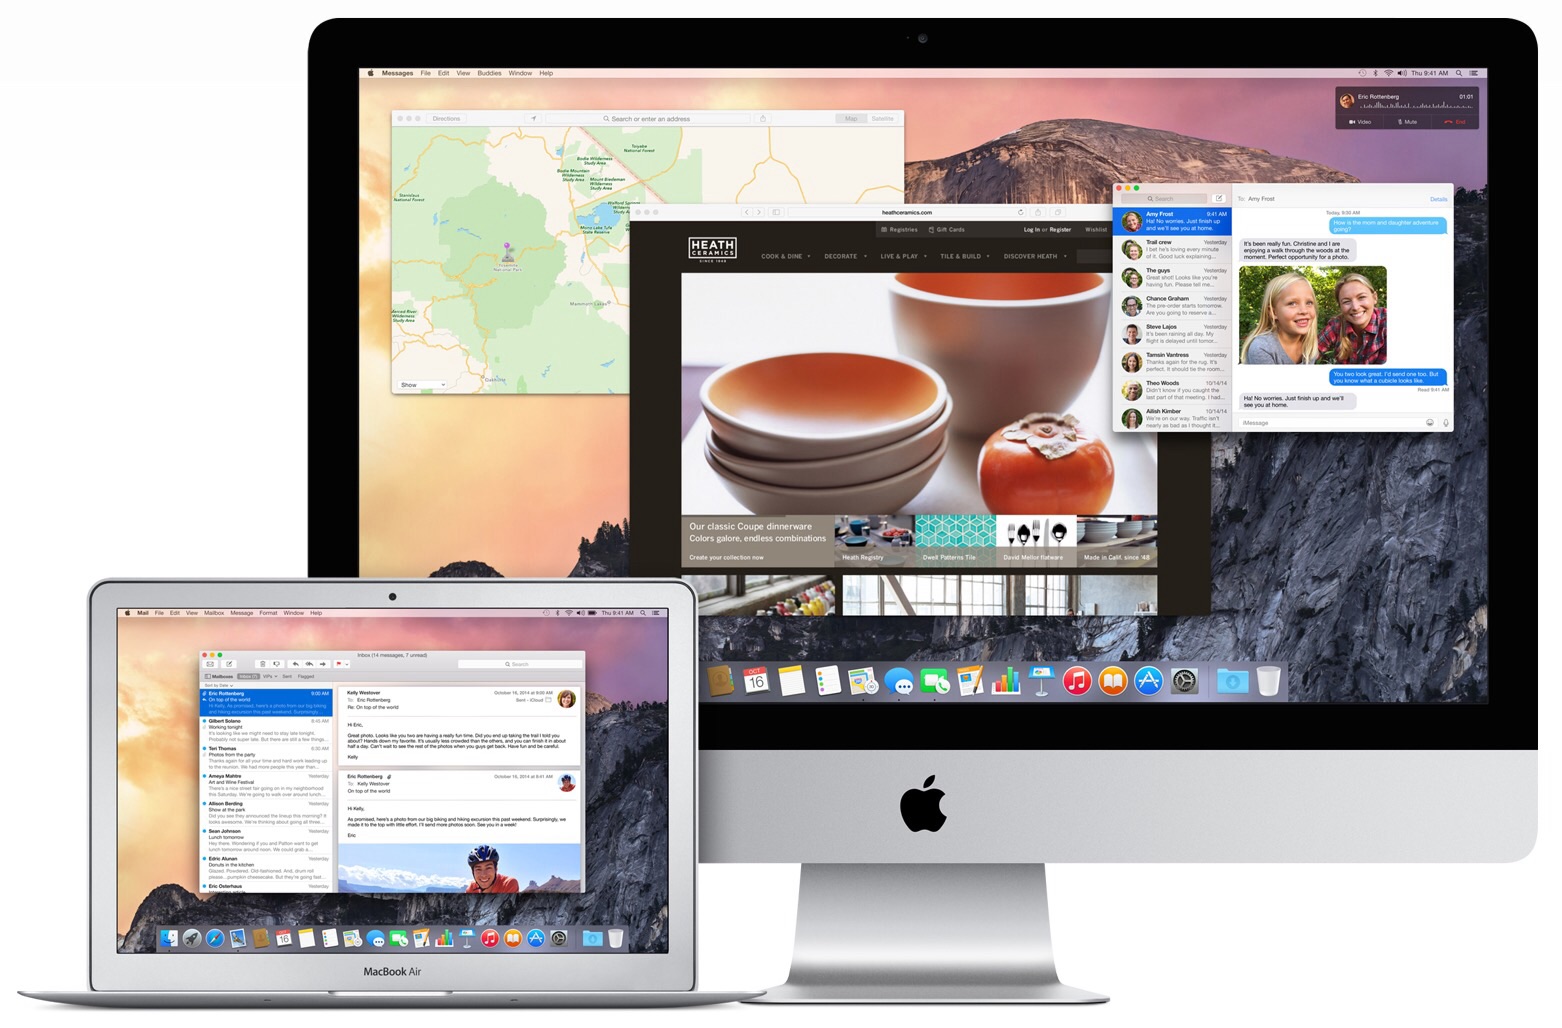 image5 1 - Apple Delivers OS X 10.10.2 with Security, WiFi Fixes, More